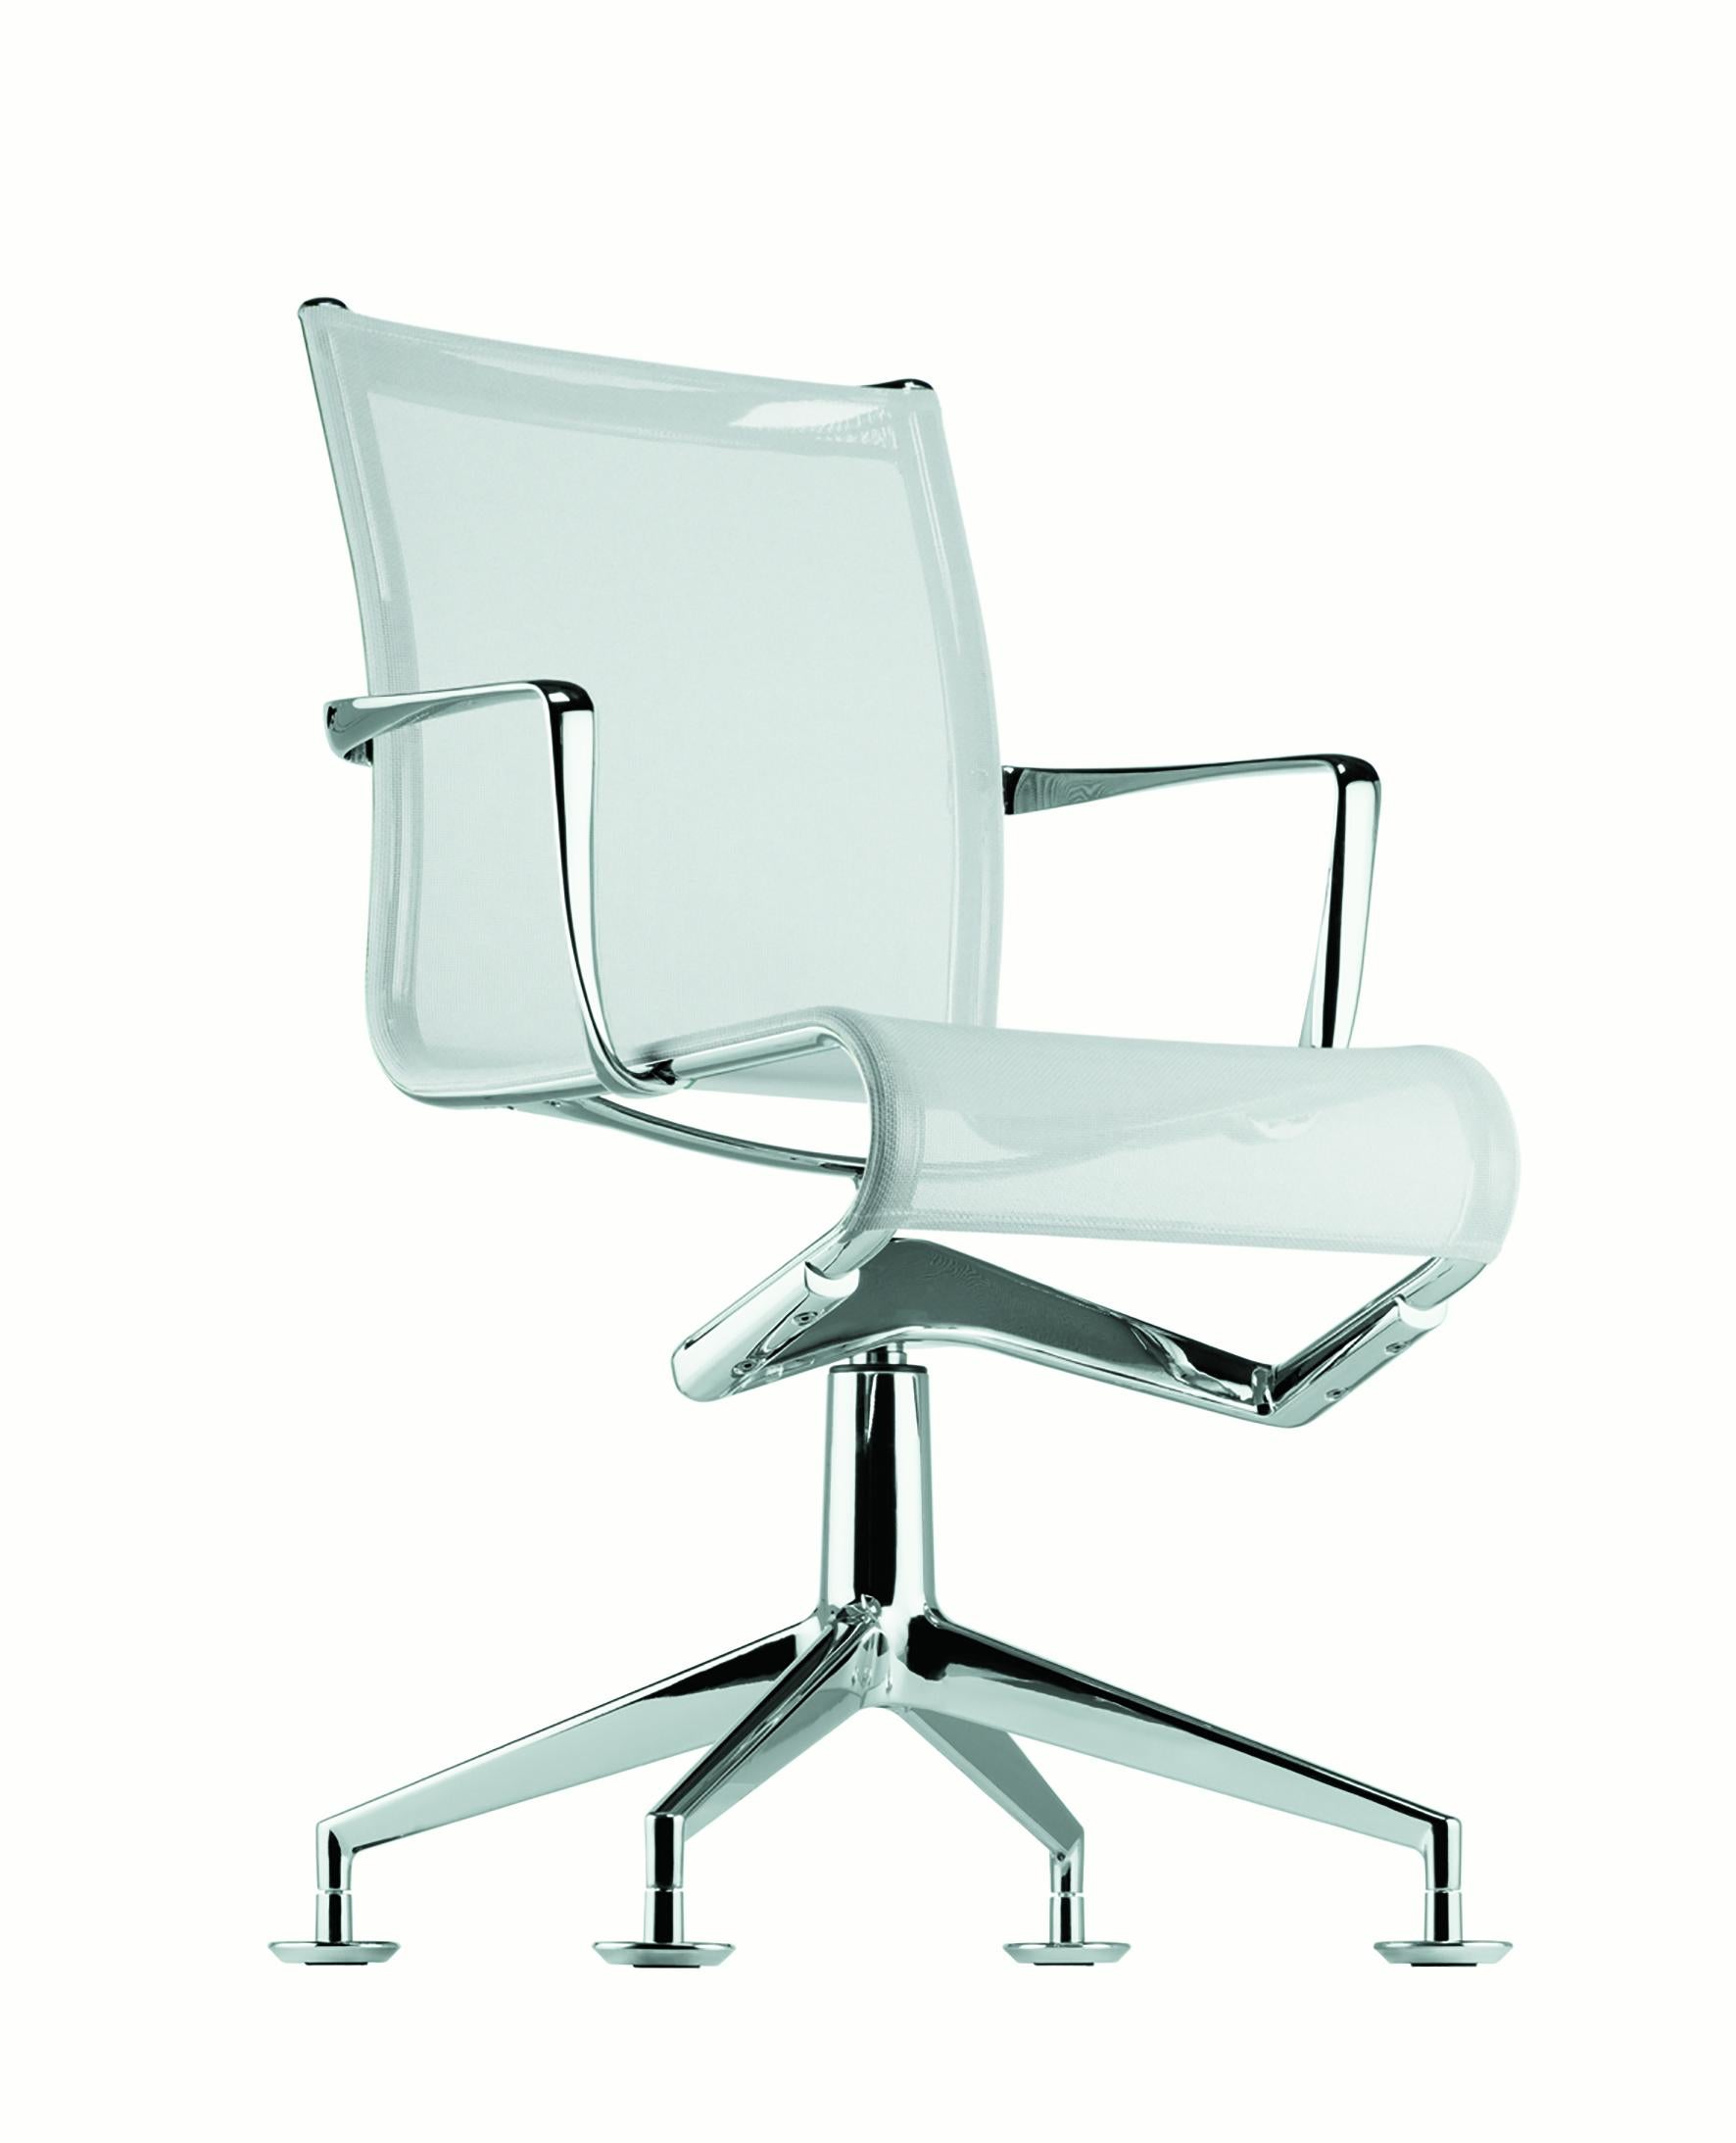 Alias 437 Meetingframe 44 Chair in White Mesh with Chromed Aluminum Frame by Alberto Meda

Self adjusting swivel chair with arms with 4-star base with glides. Structure made of extruded aluminium profile and die-cast aluminium elements. Seat and